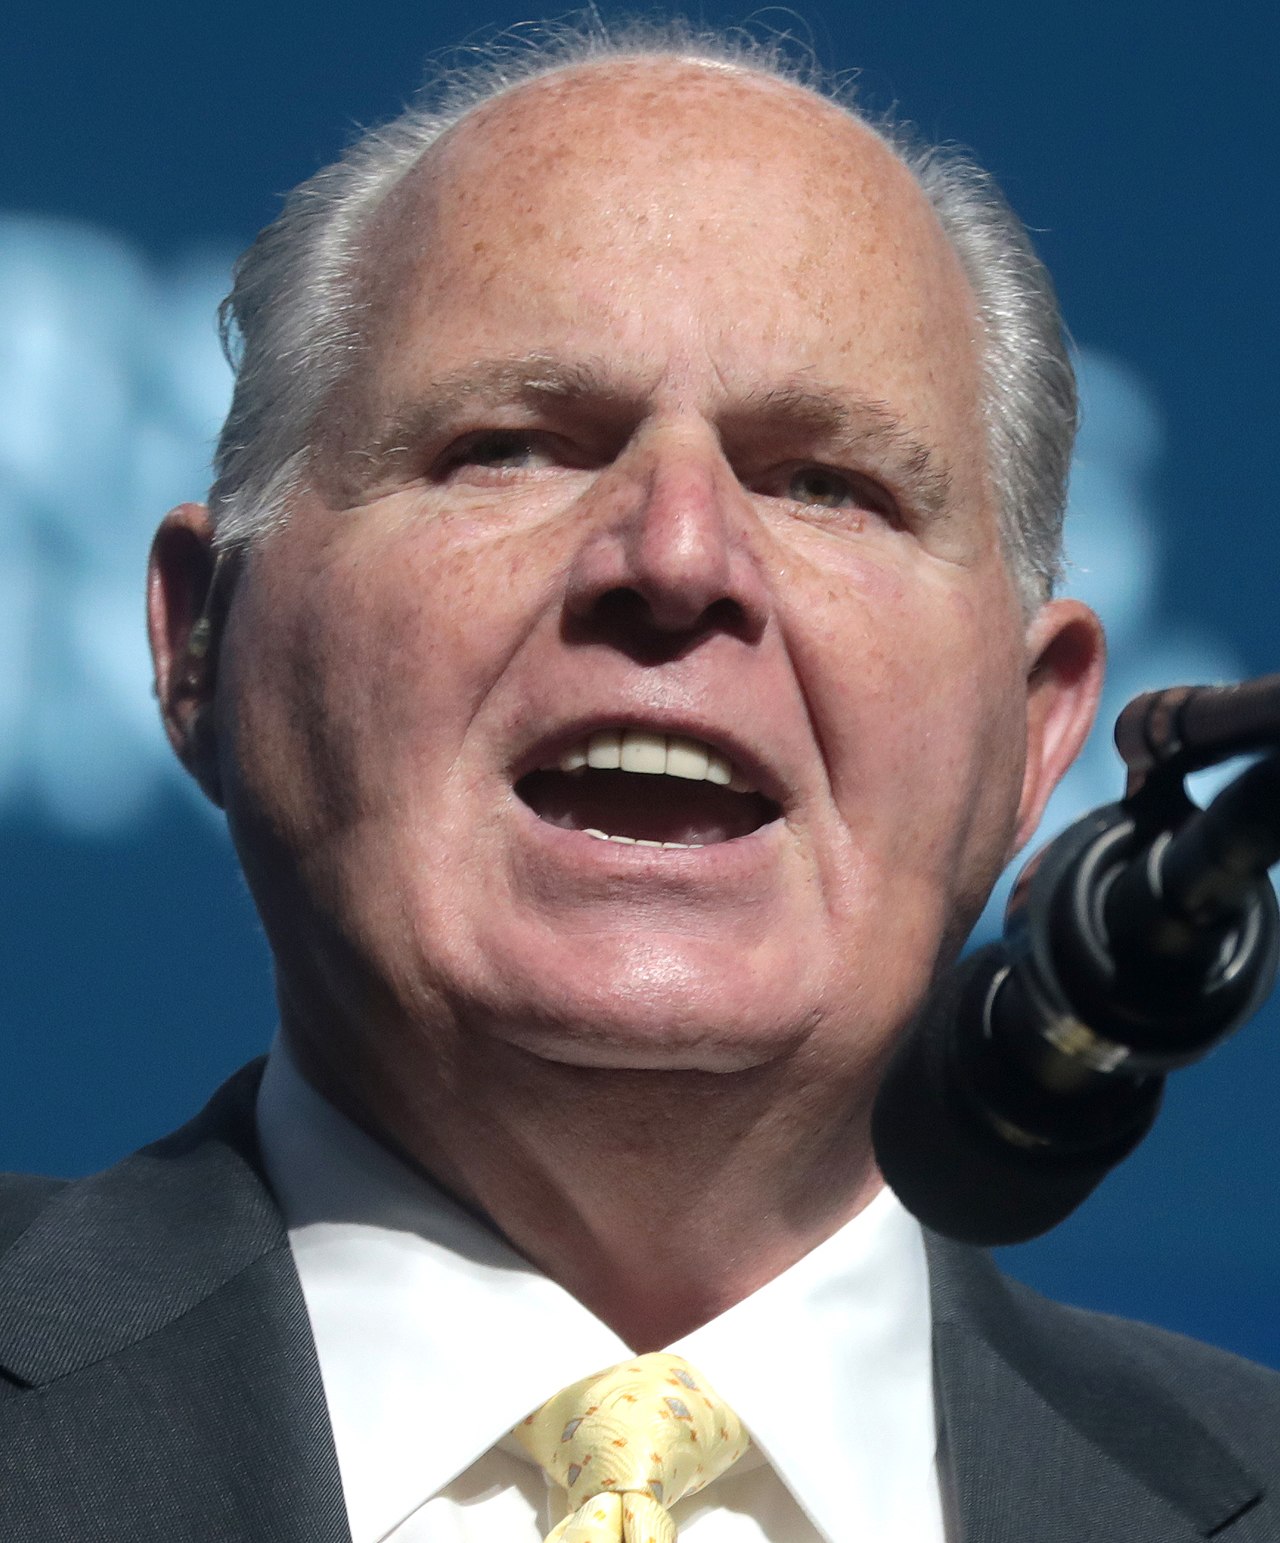 did rush limbaugh die from